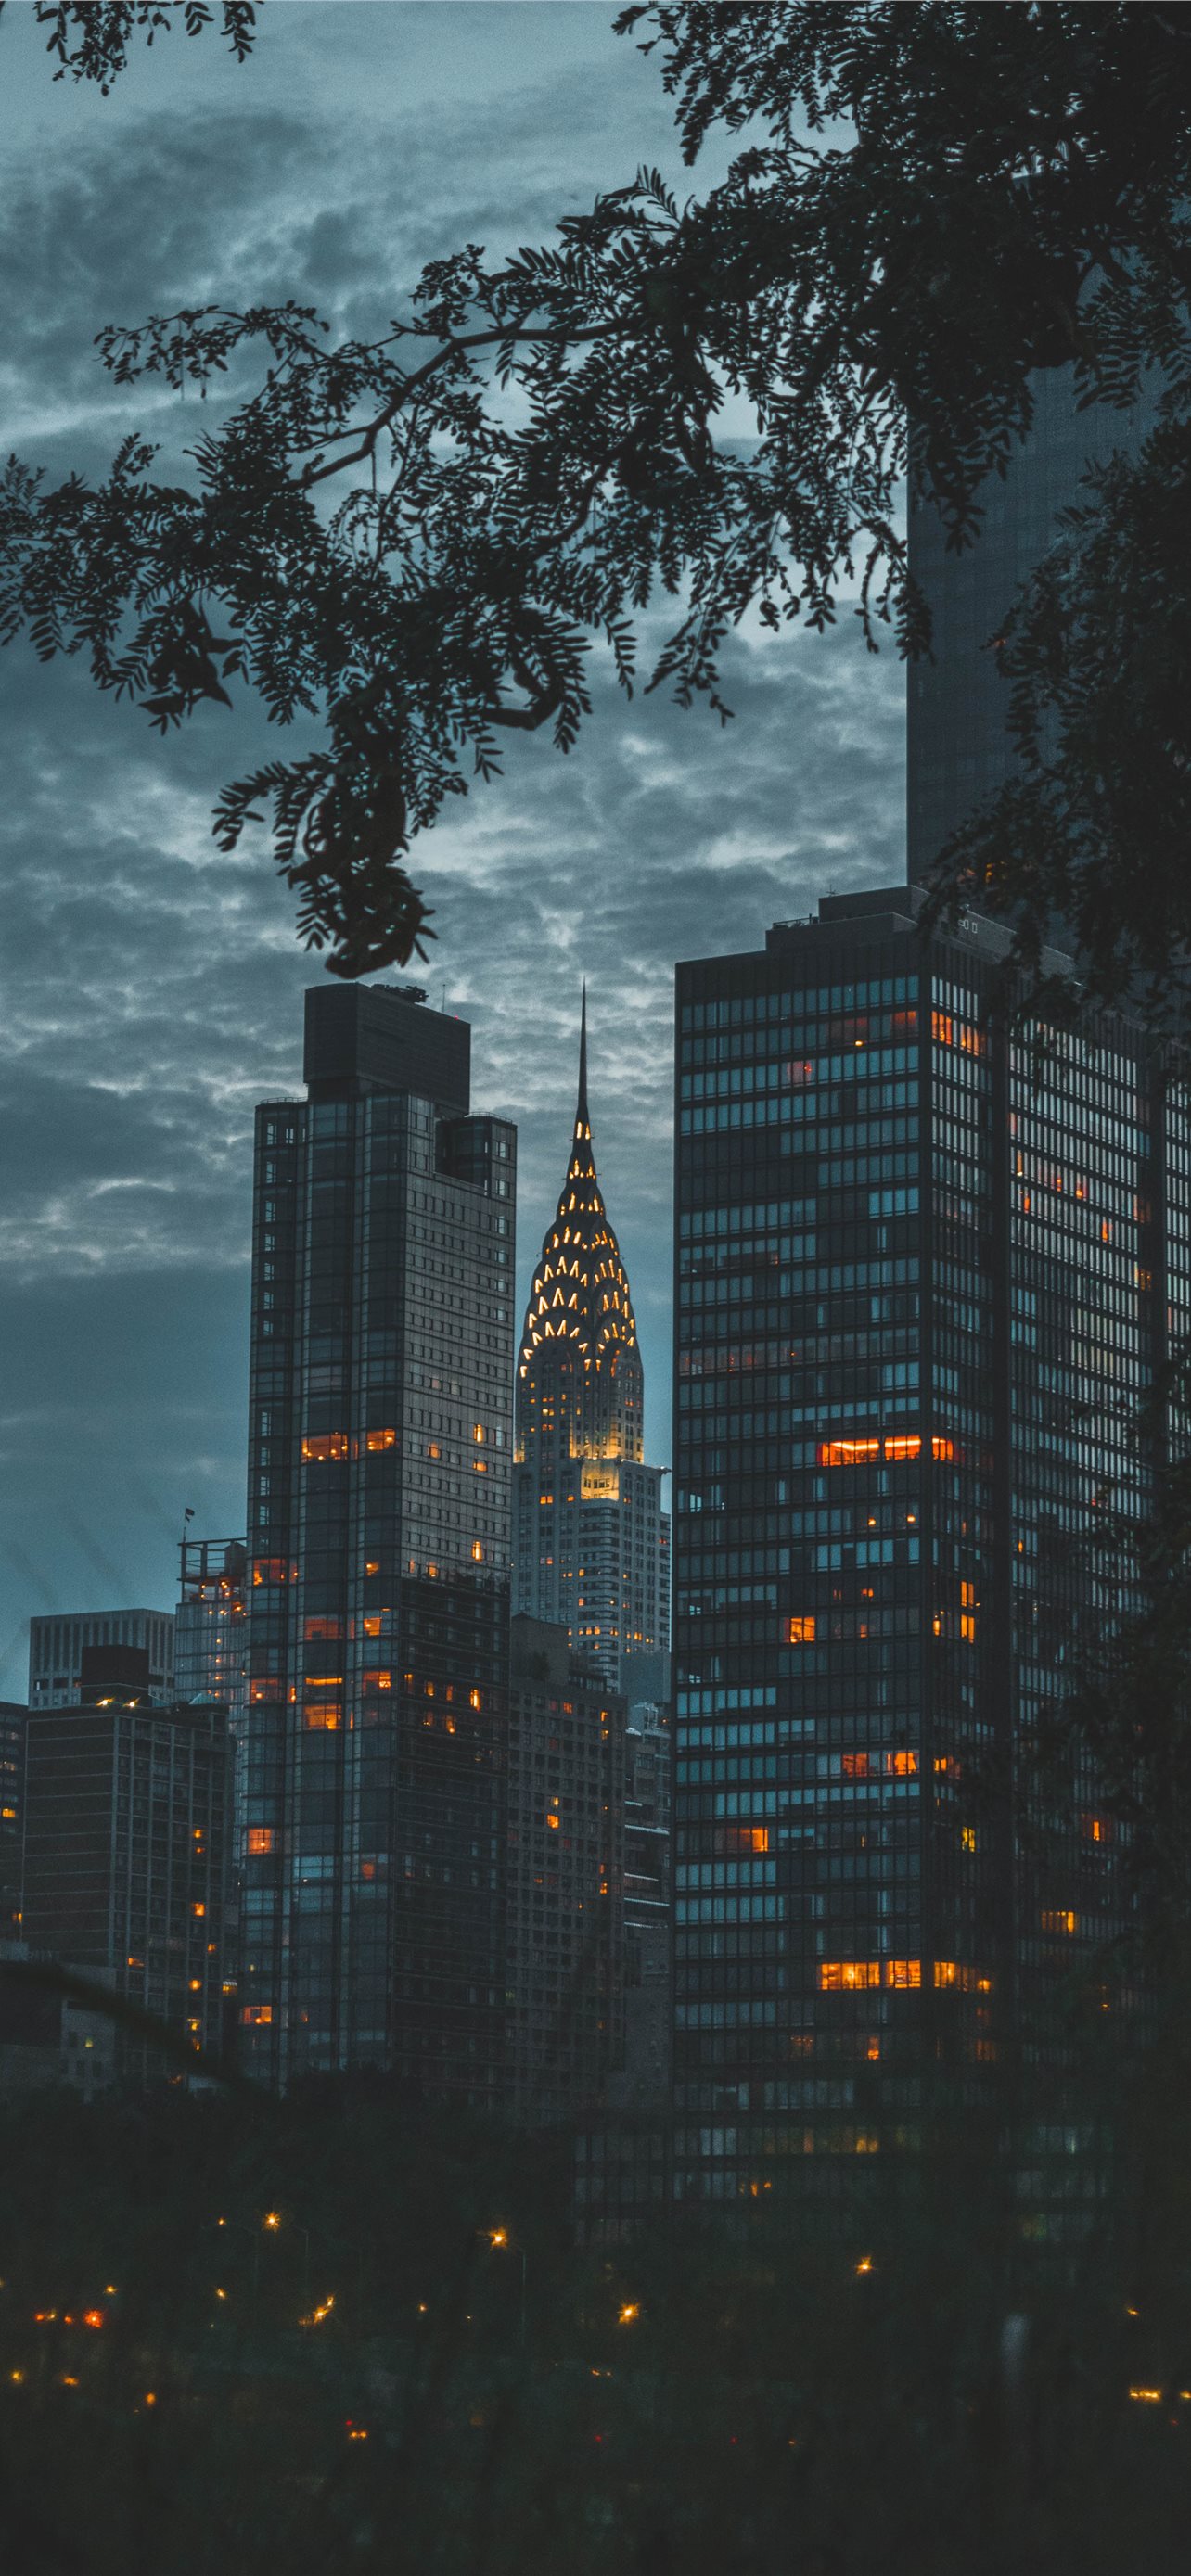 550+ Night City Pictures | Download Free Images on Unsplash